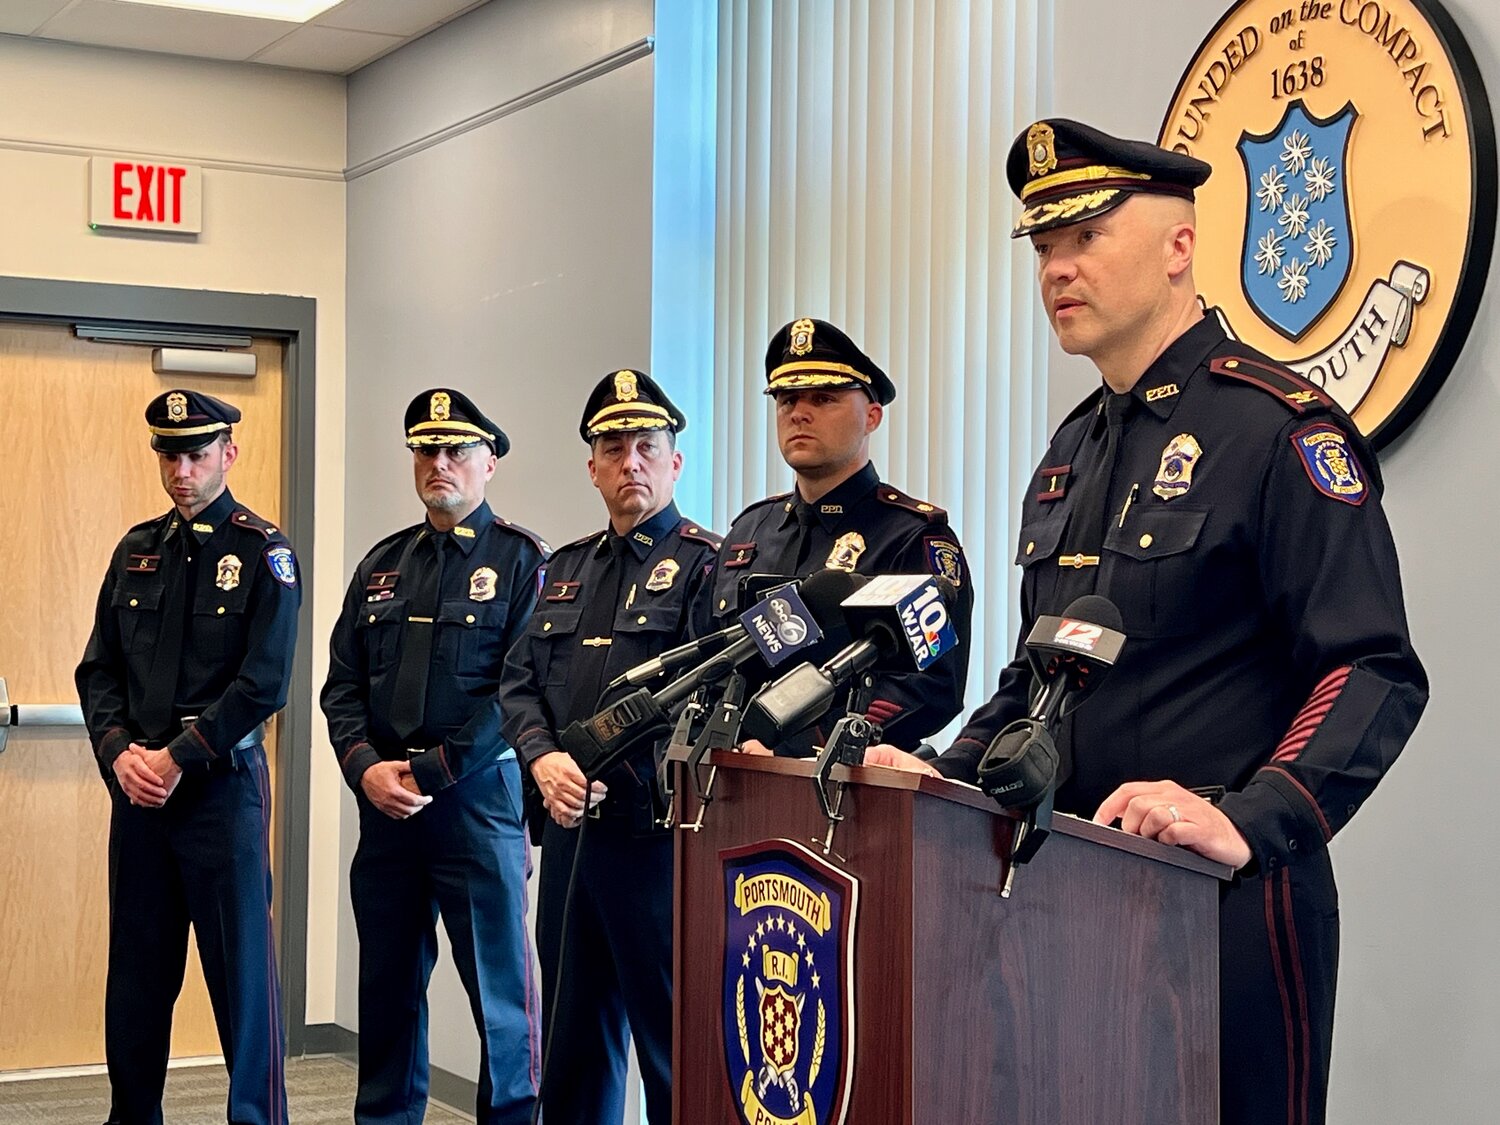 Portsmouth Police Chief Brian Peters briefs members of the media during a press conference Tuesday at the police station. The other officers are (from left) Detective Lt. Lee Trott; Capt. Richard Ruest, in charge of the patrol division; Capt. John Cahoon, in charge of the administrative division including detectives; and Maj. Michael Morse, deputy chief of police.